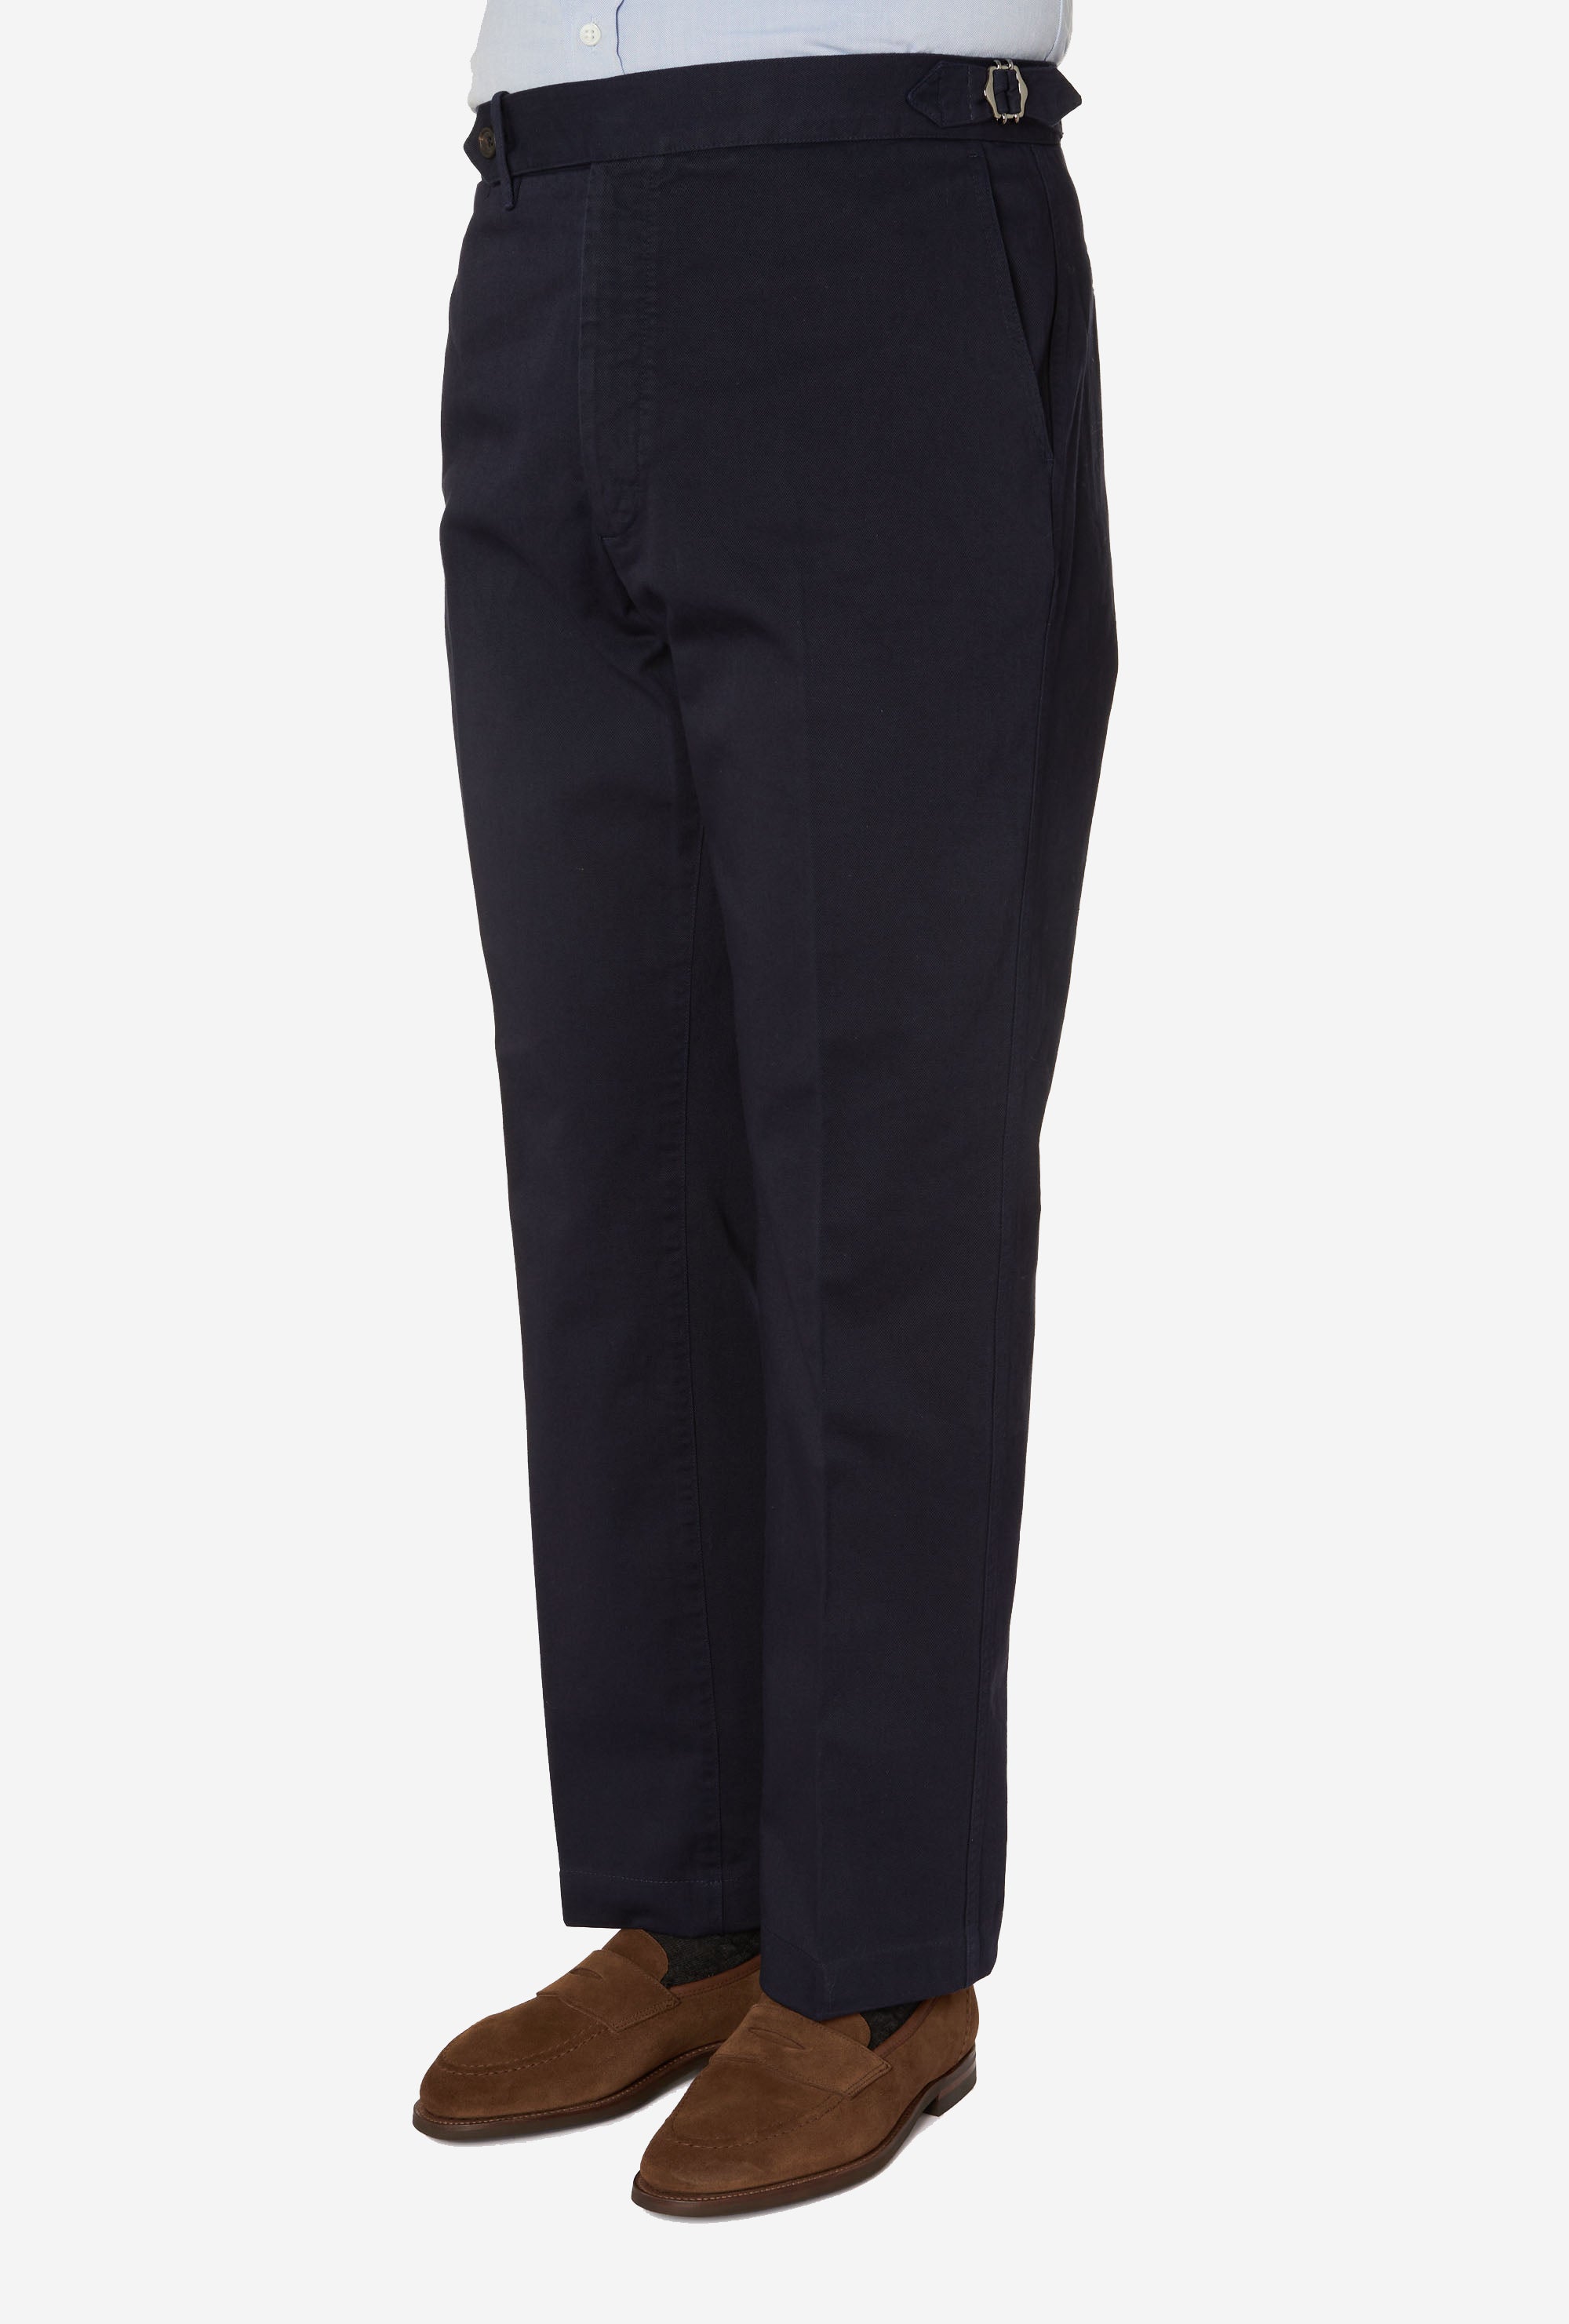 Garment Dyed Flat Front Cotton Trouser Navy